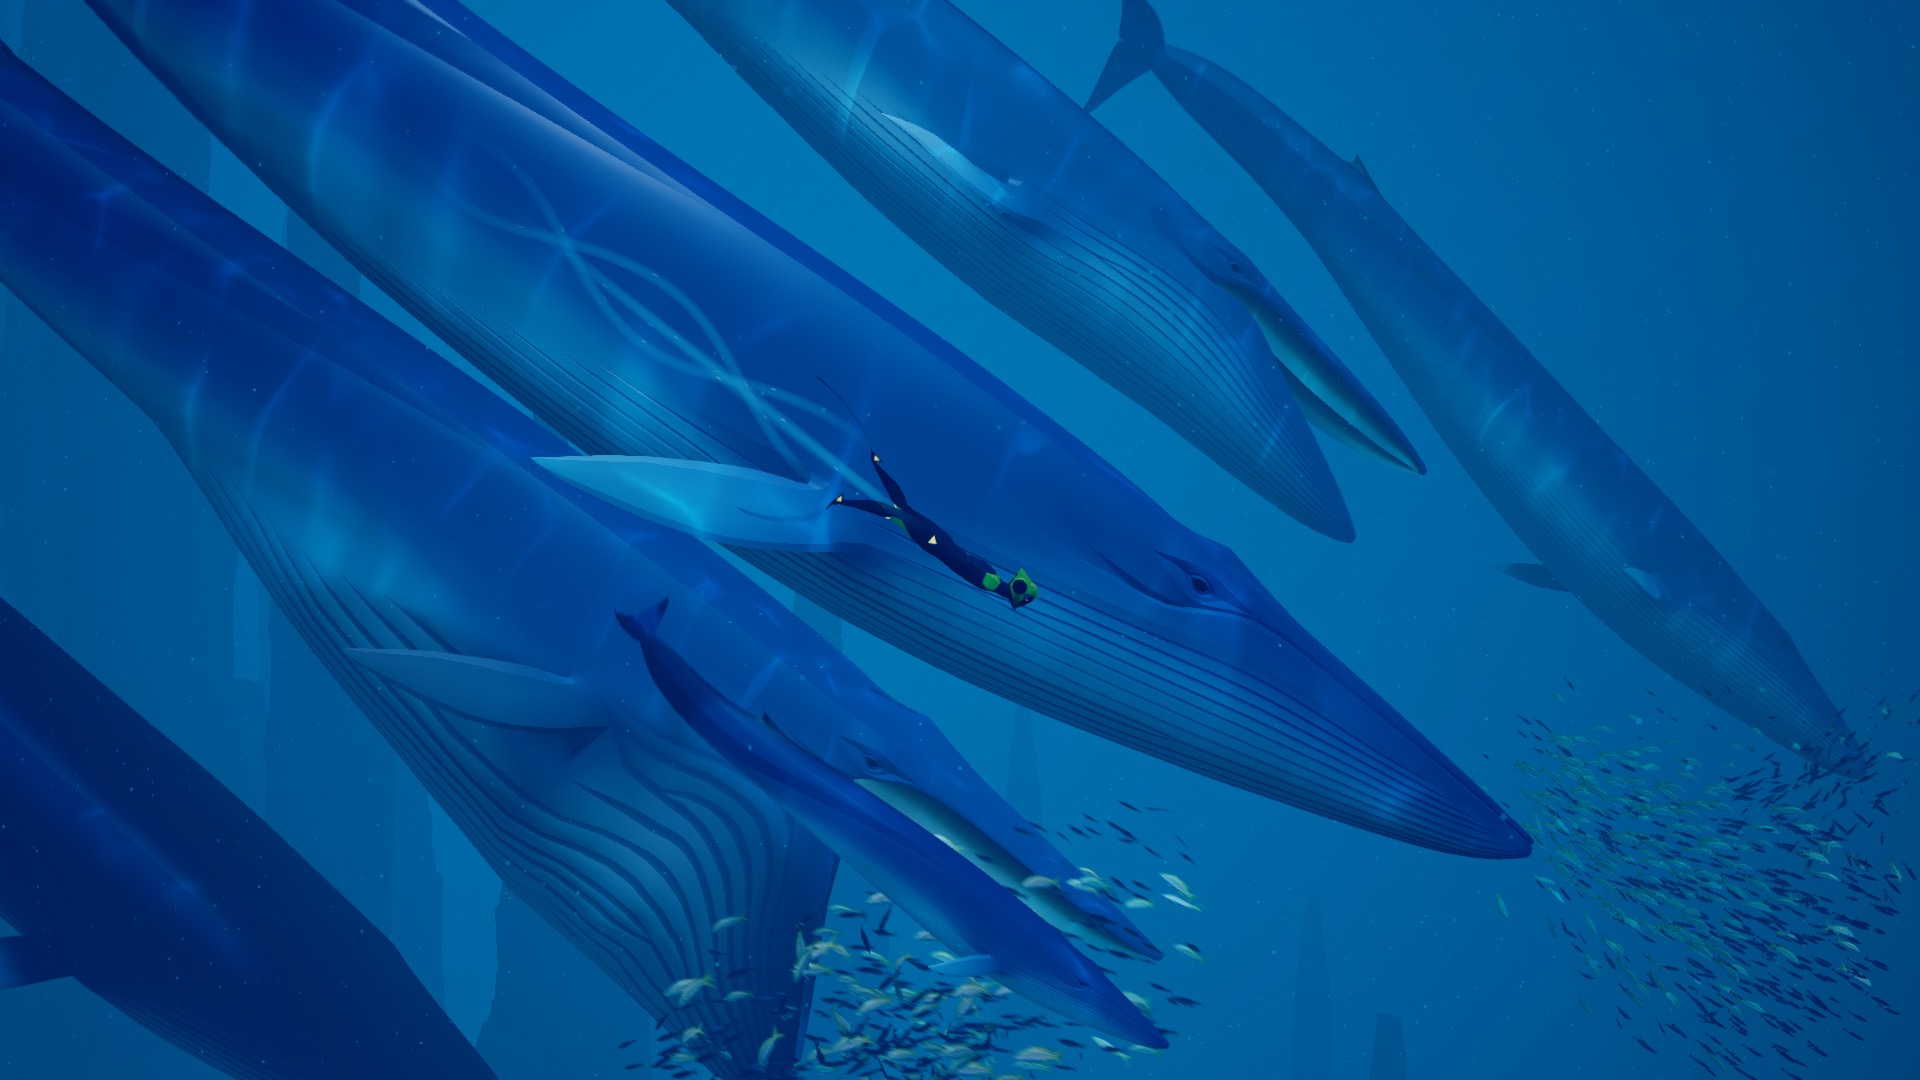 A screenshot of Abzu, showing a diver swimming with blue whales